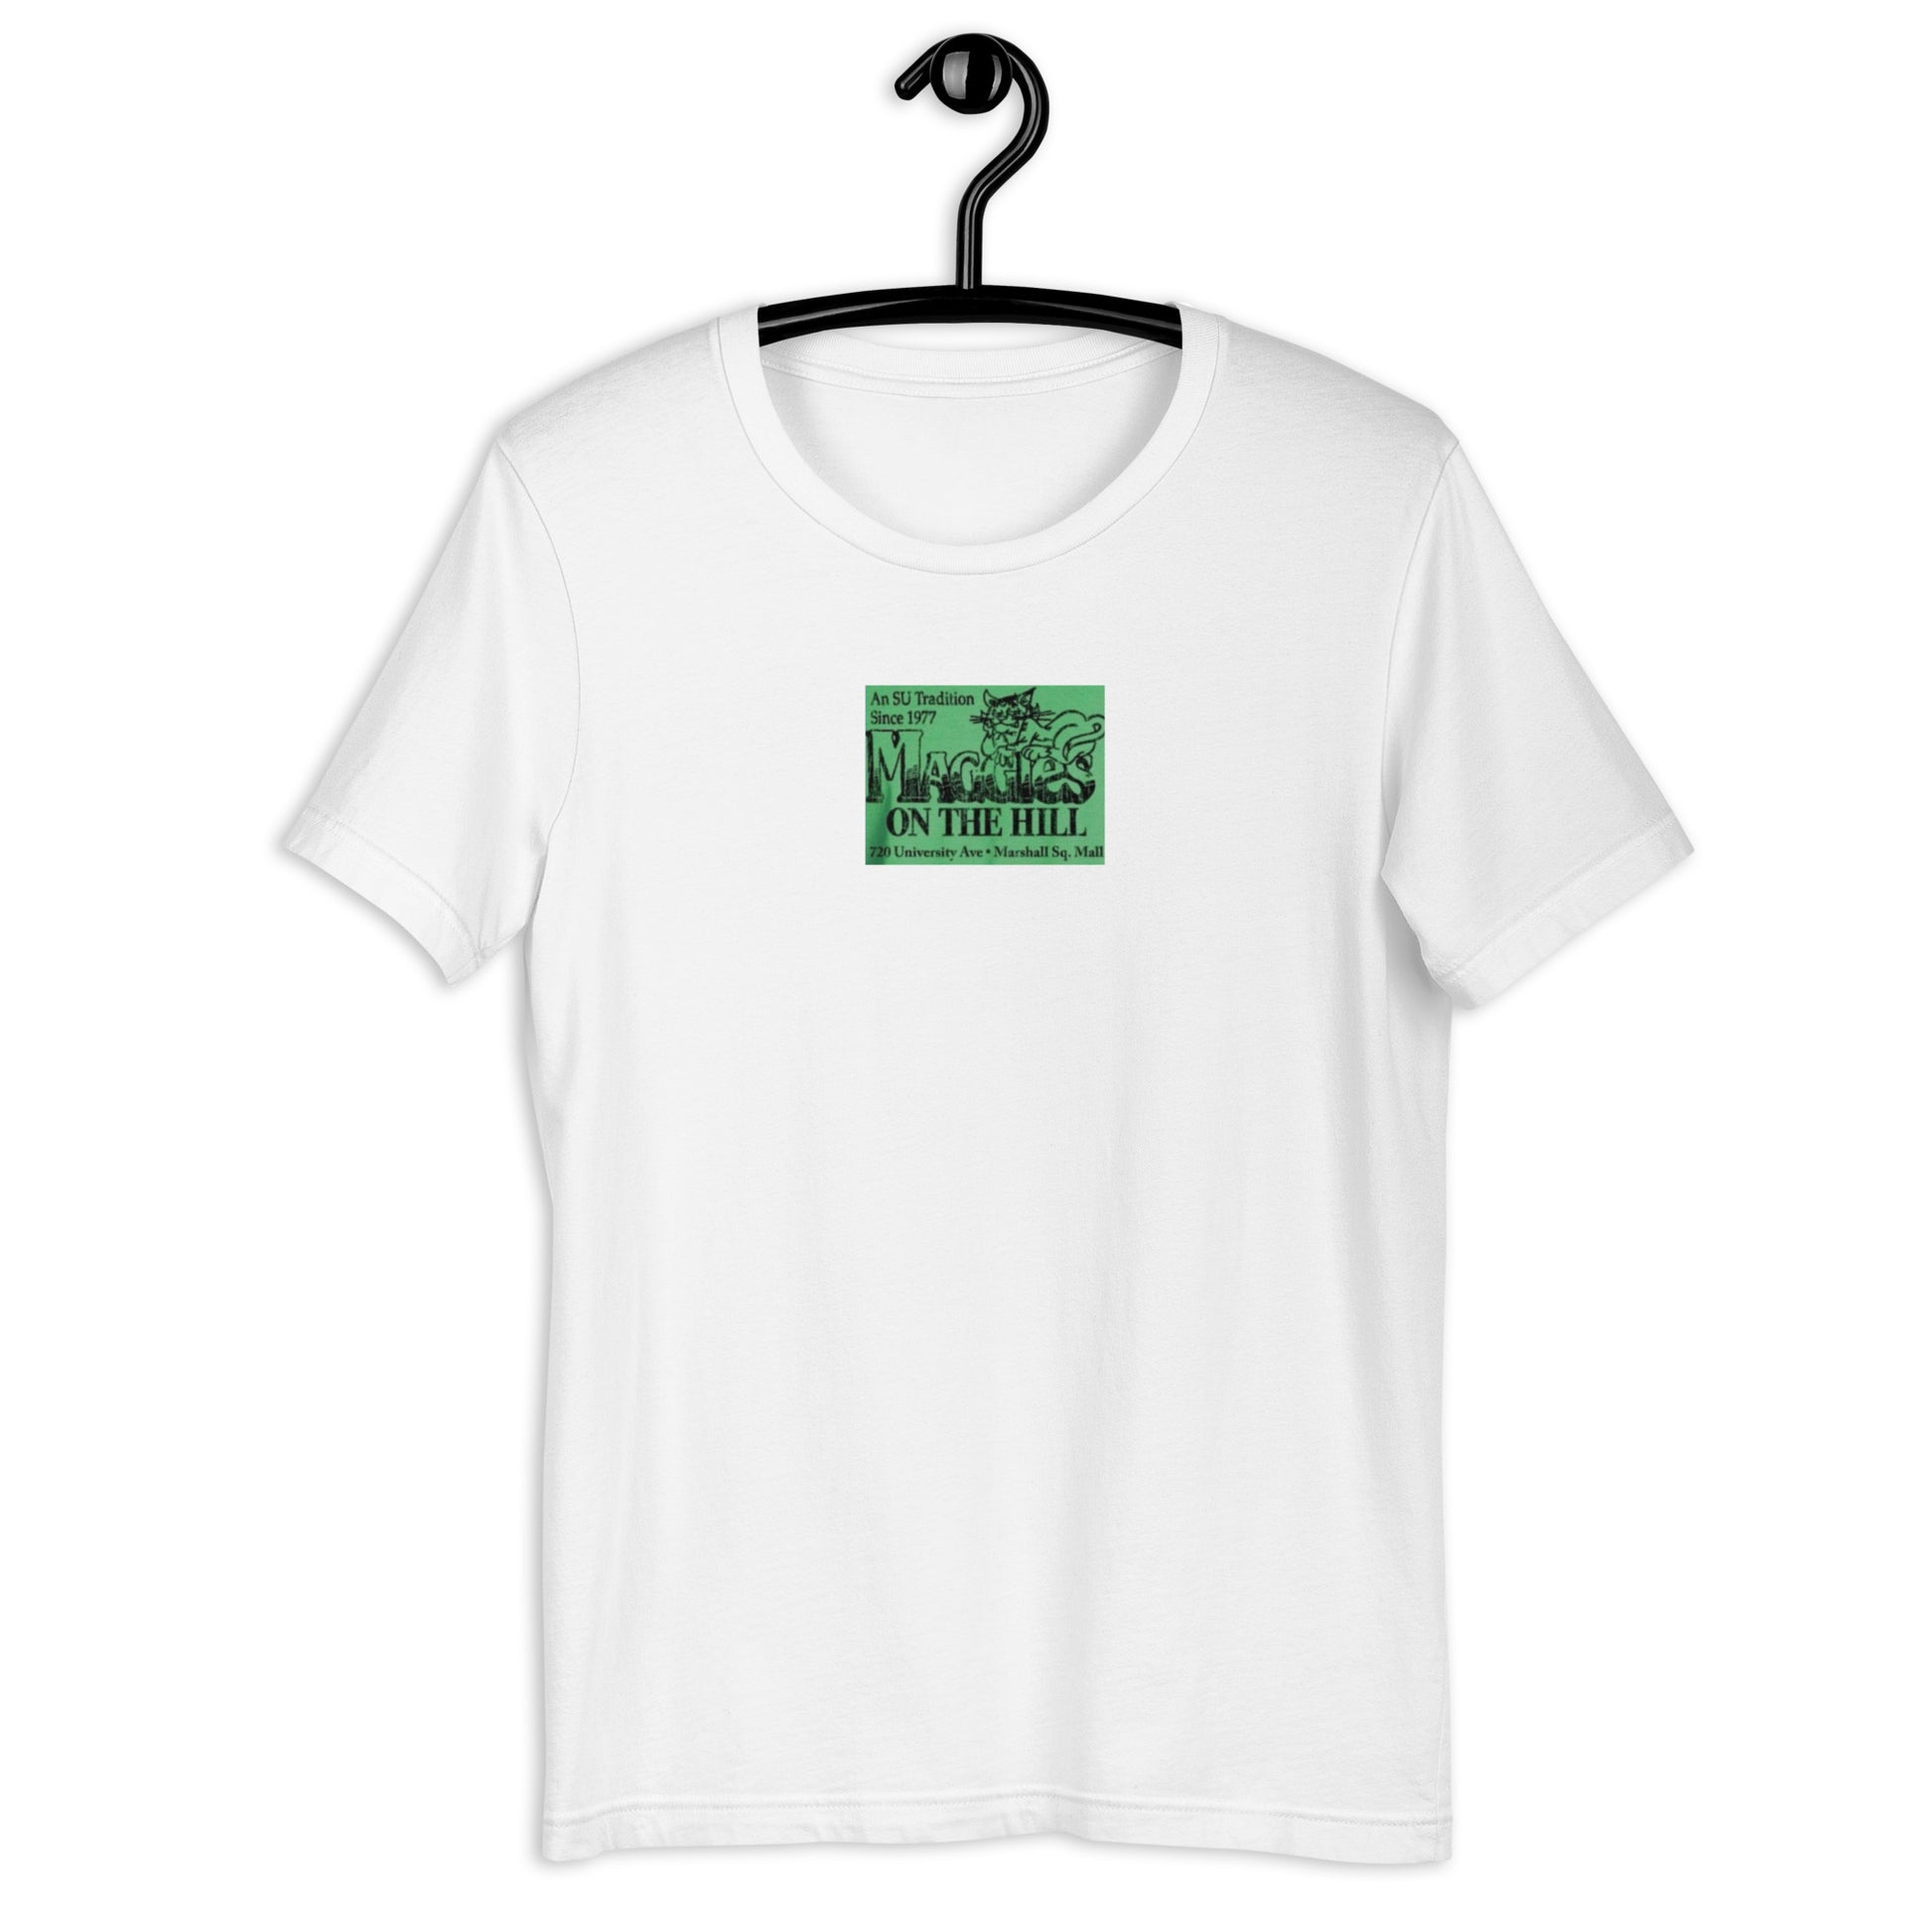 White graphic tee with vintage logo. College-casual. 